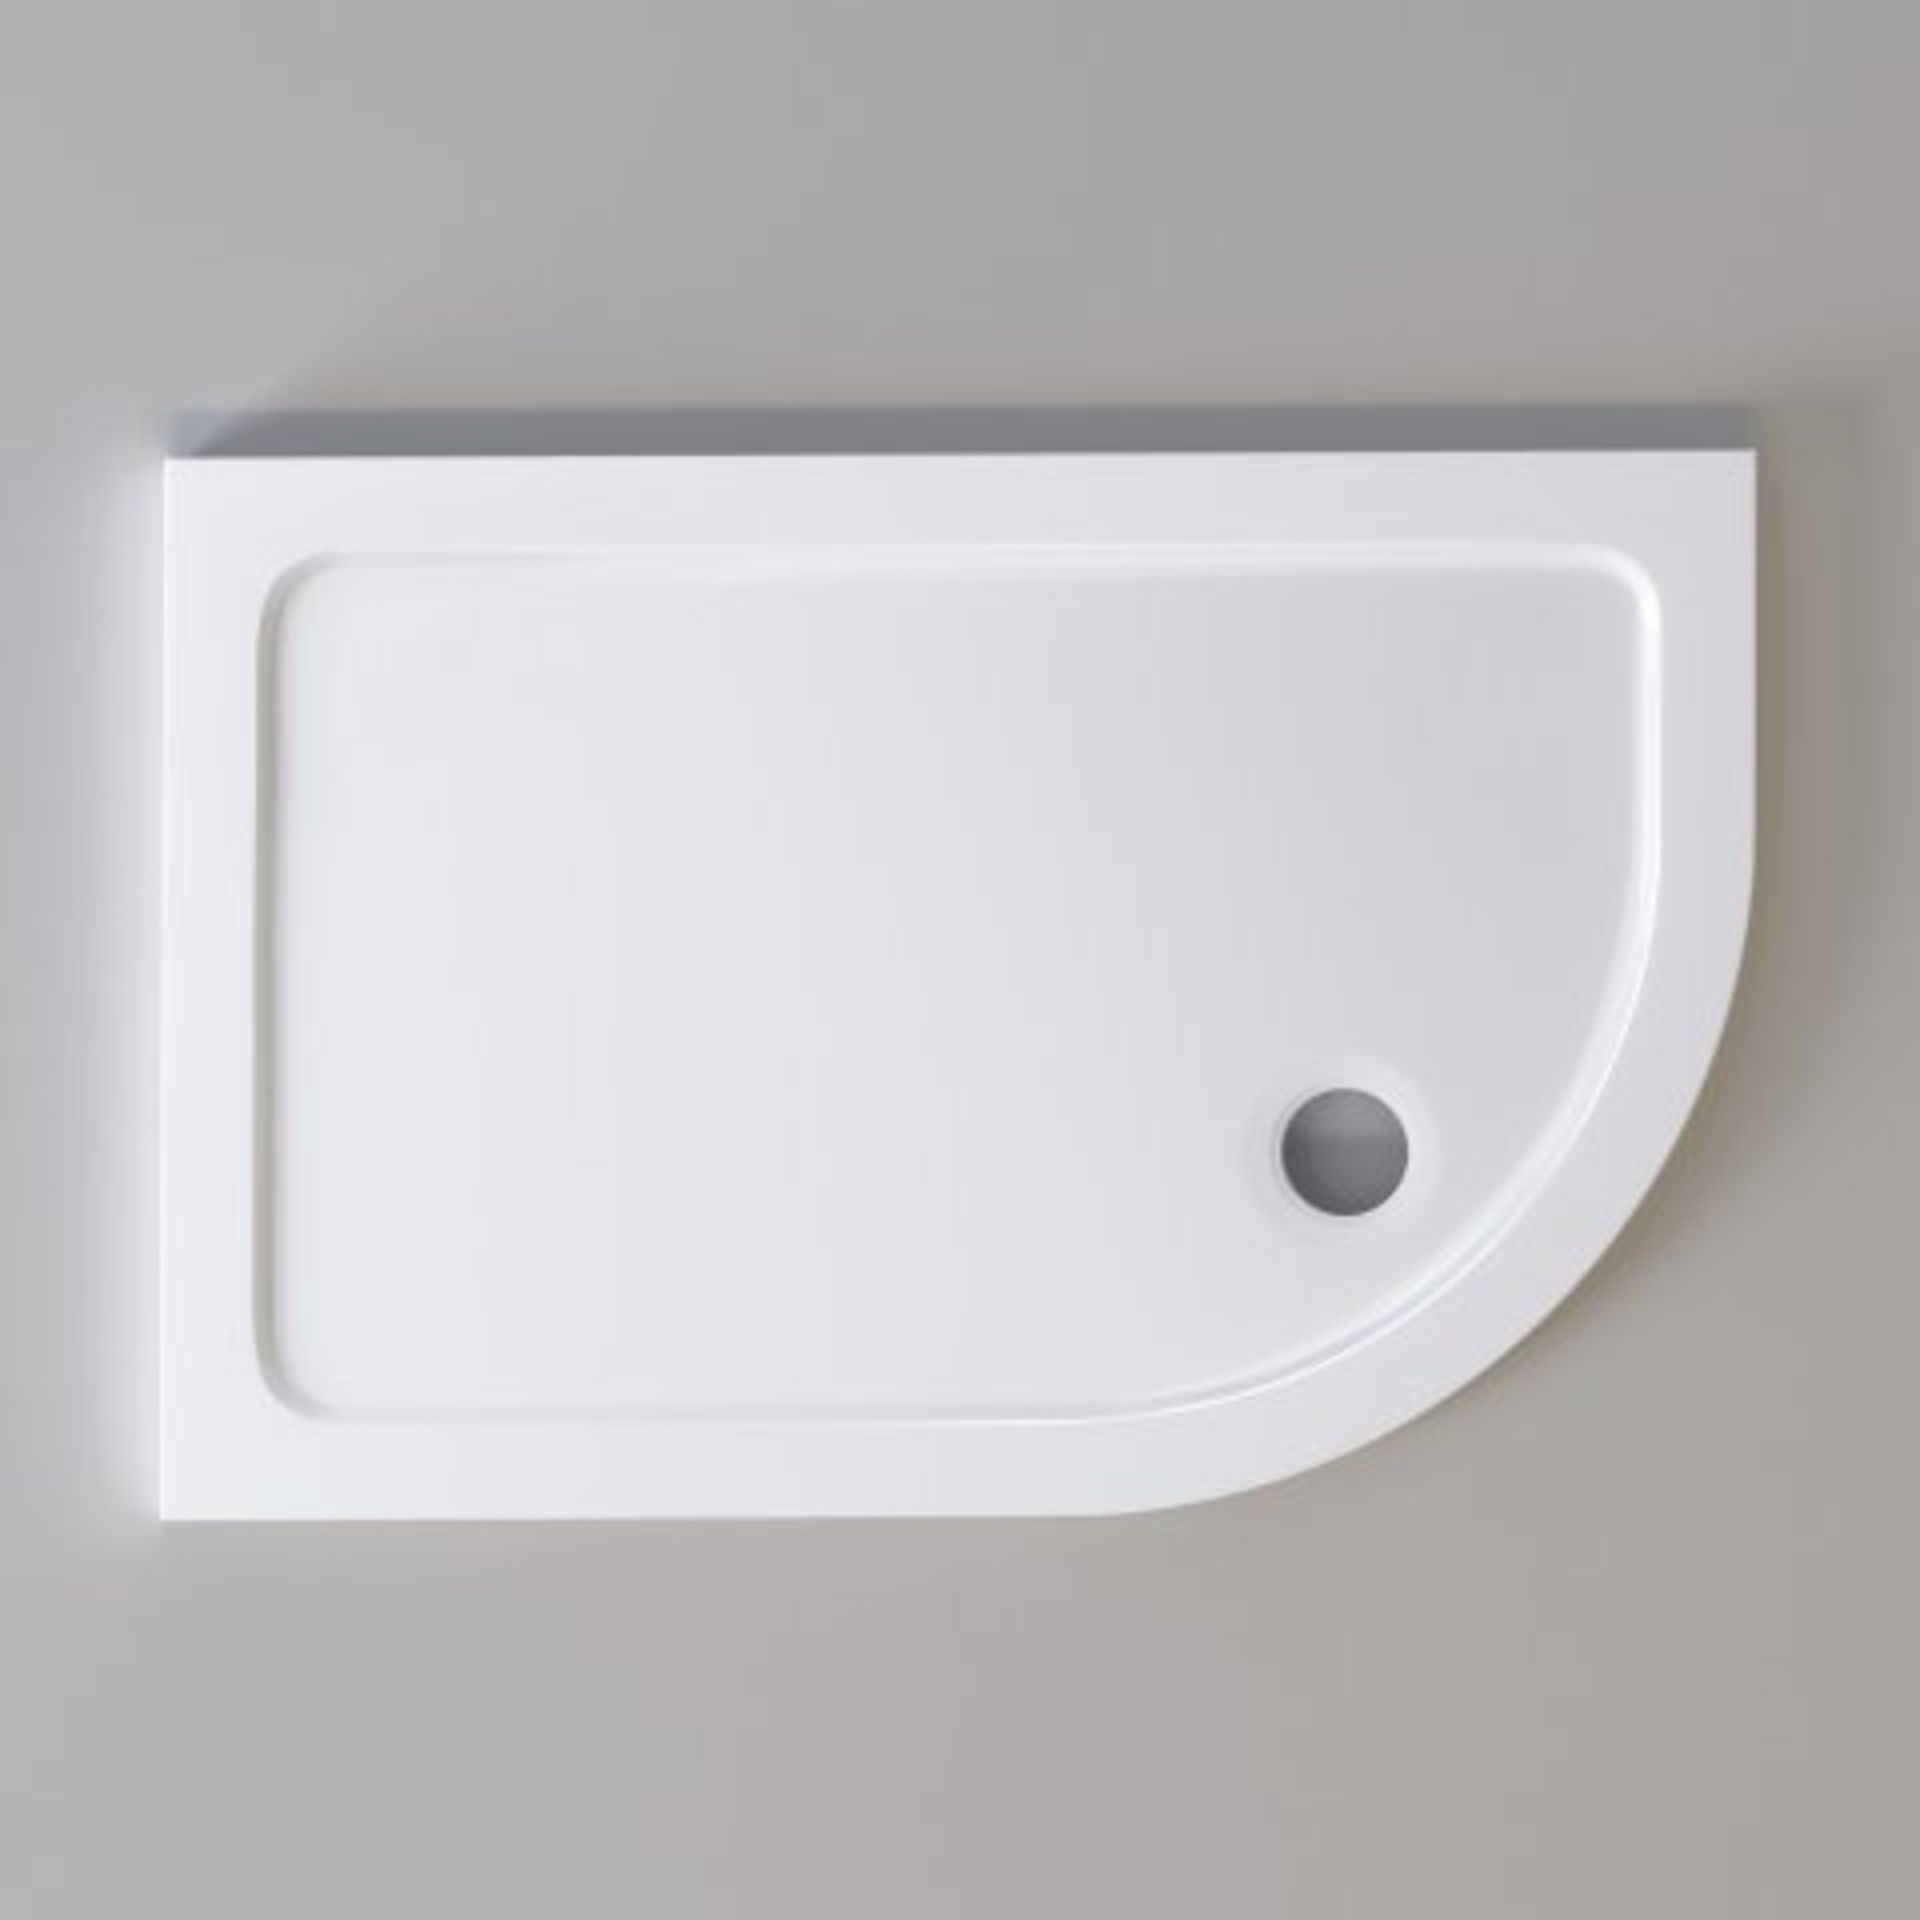 (AA83) 1200x800mm Offset Quadrant Ultraslim Stone Shower Tray - Right. RRP £299.99. Magnificently - Image 2 of 2